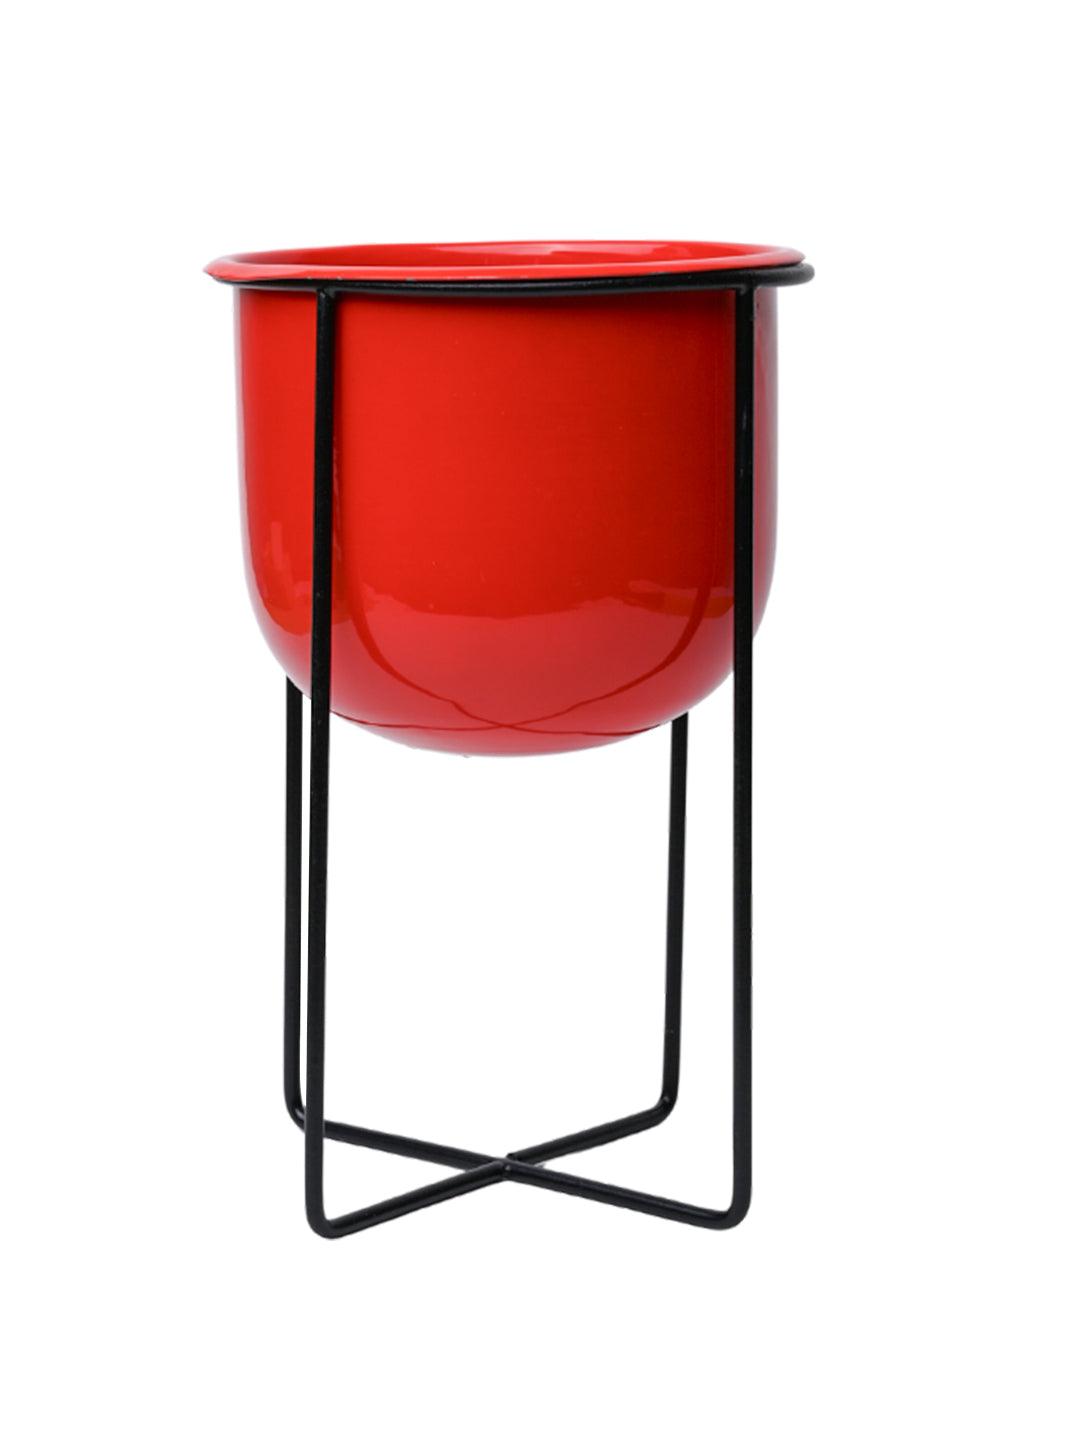 Stylish Red Plant Pot With Stand - MARKET 99